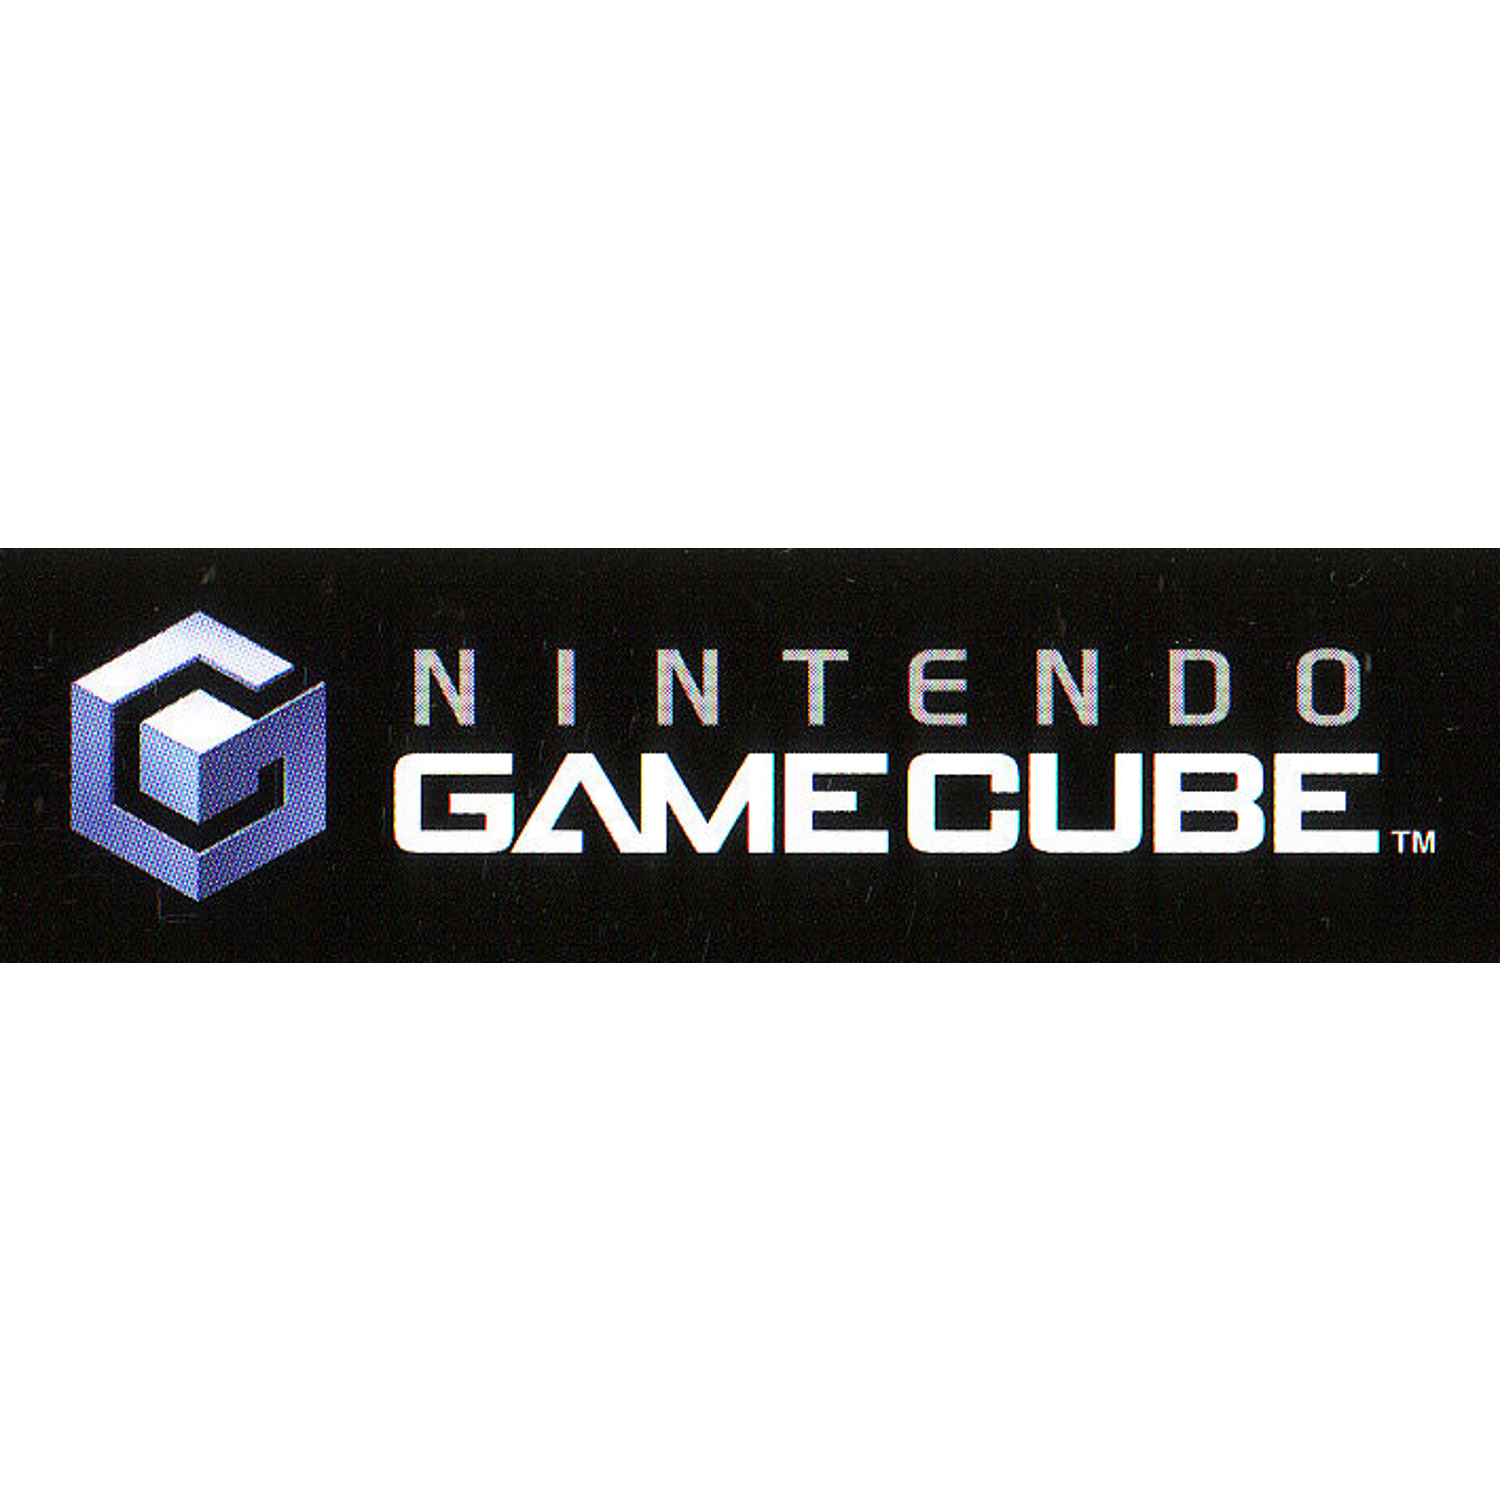 Nintendo GameCube : Free Download, Borrow, and Streaming 